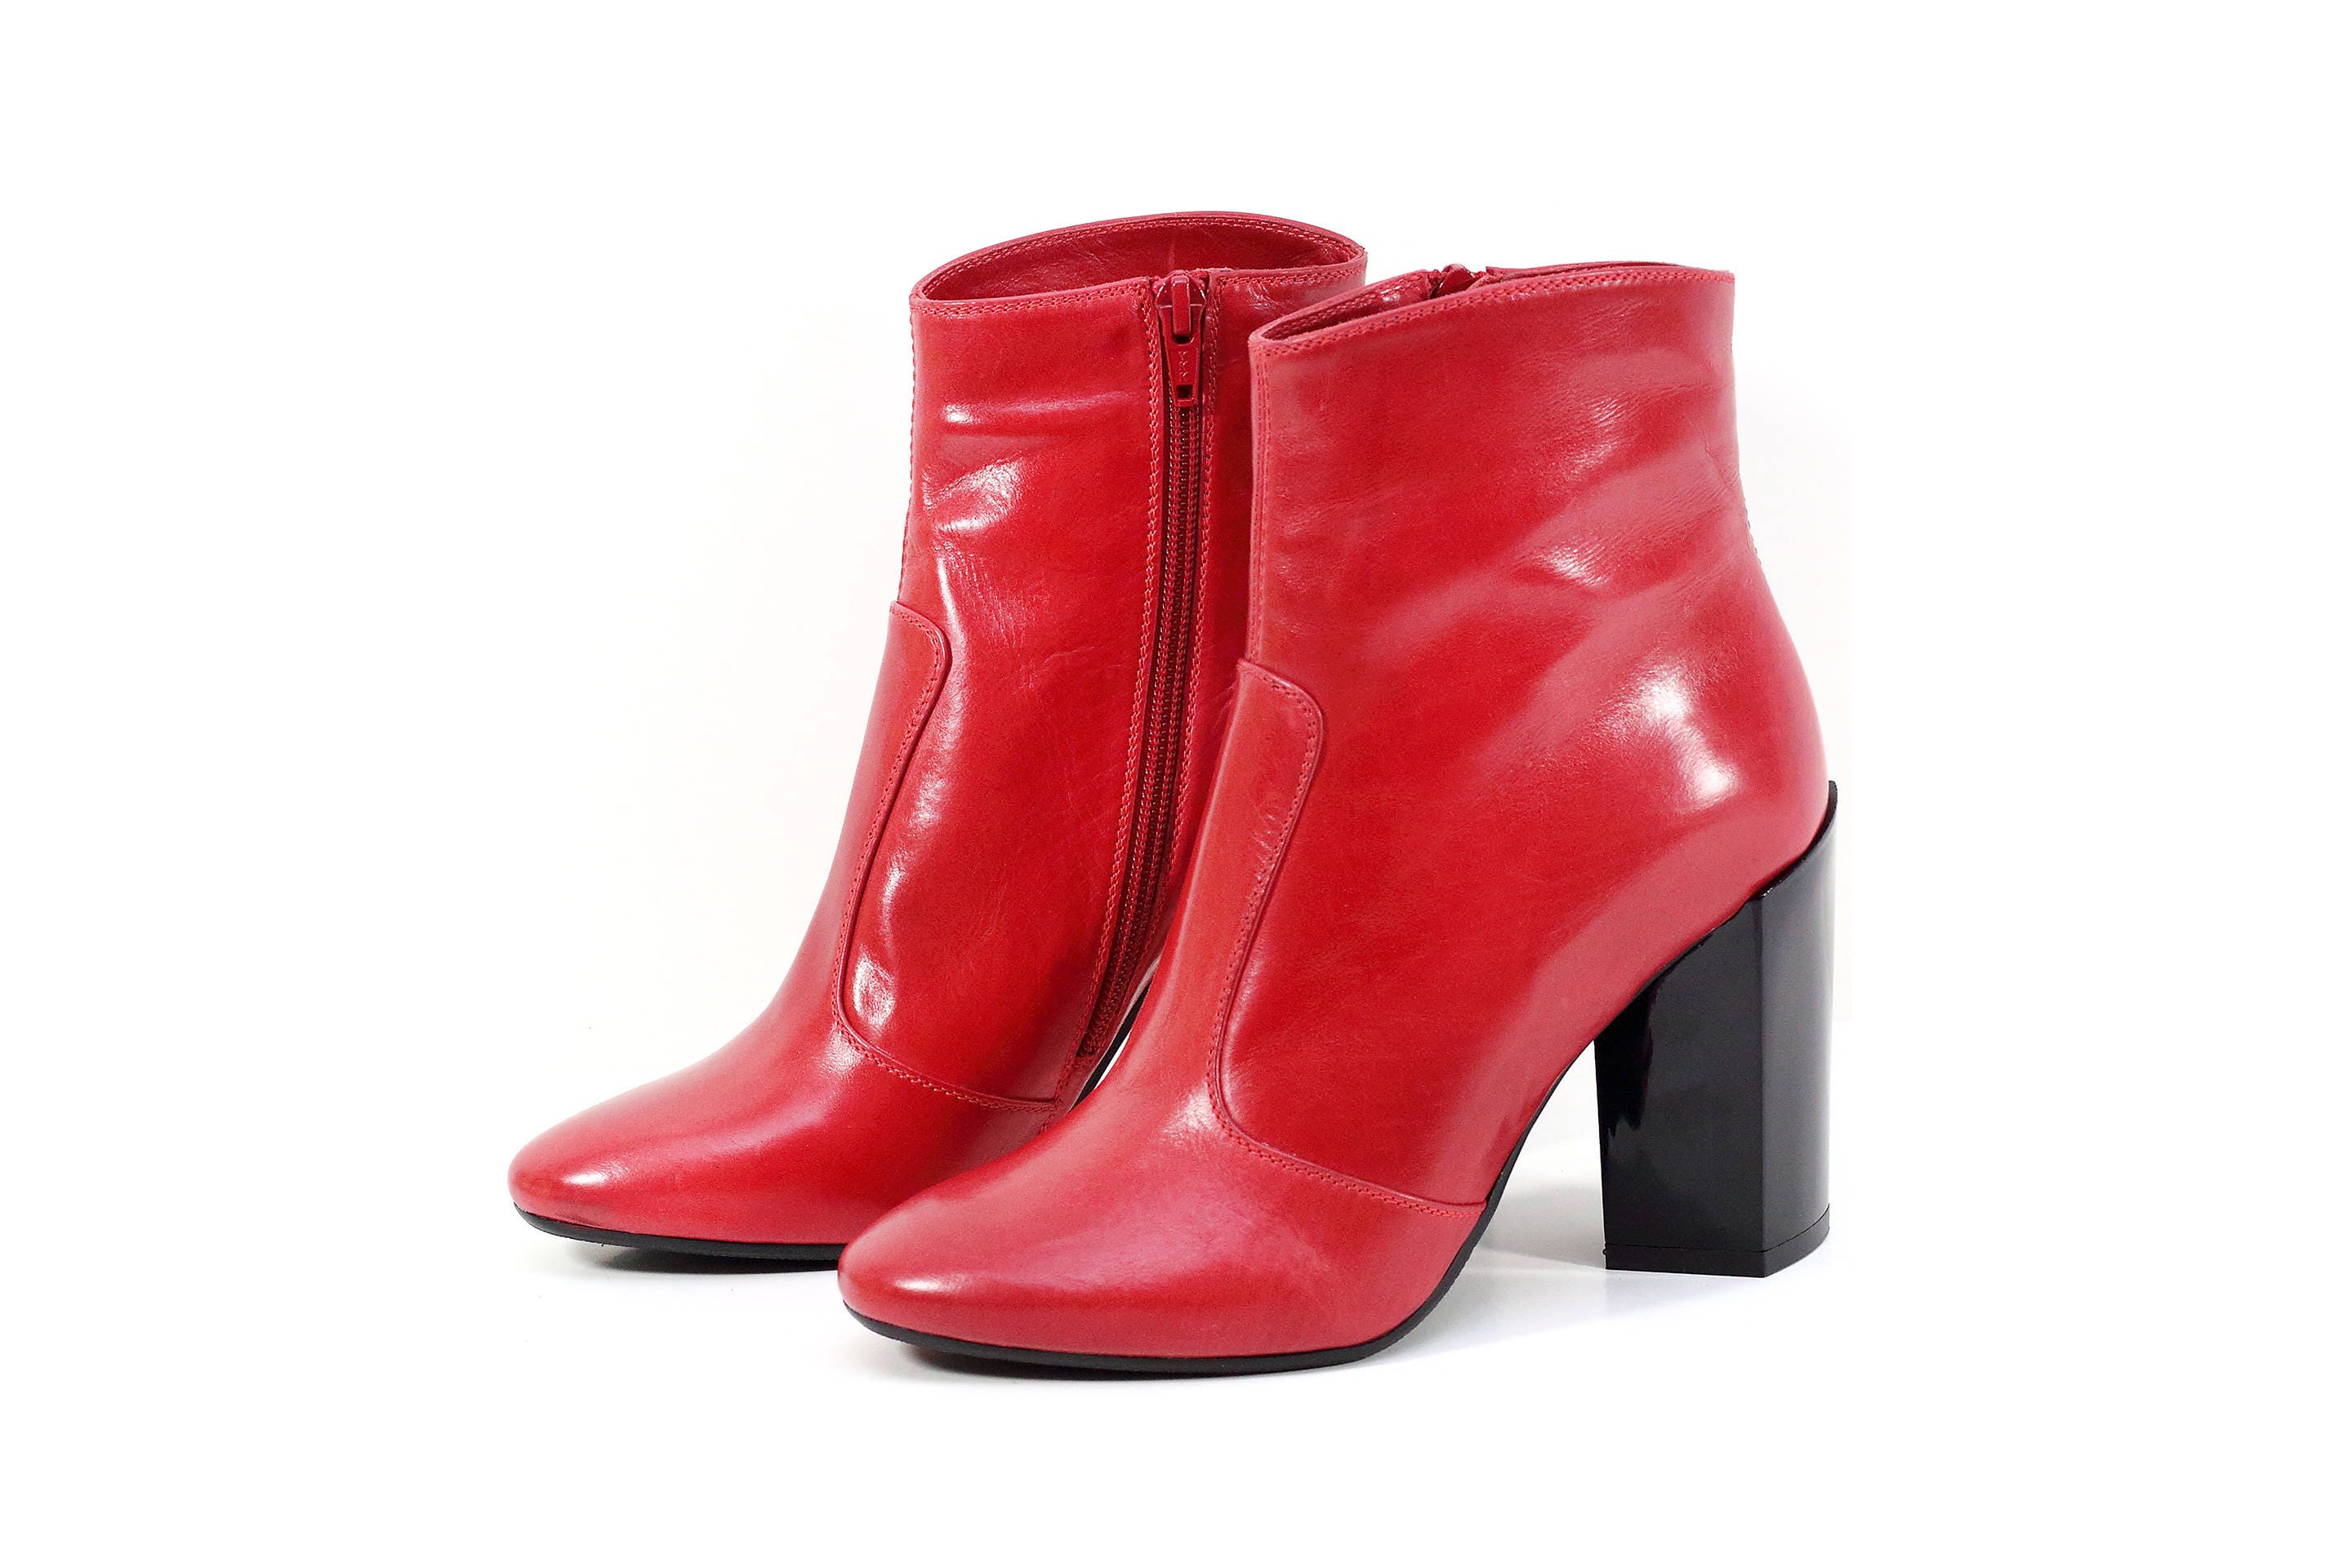 Elegant Women's Boots, Red Ankle Boots, Genuine Leather Boots, Red ...